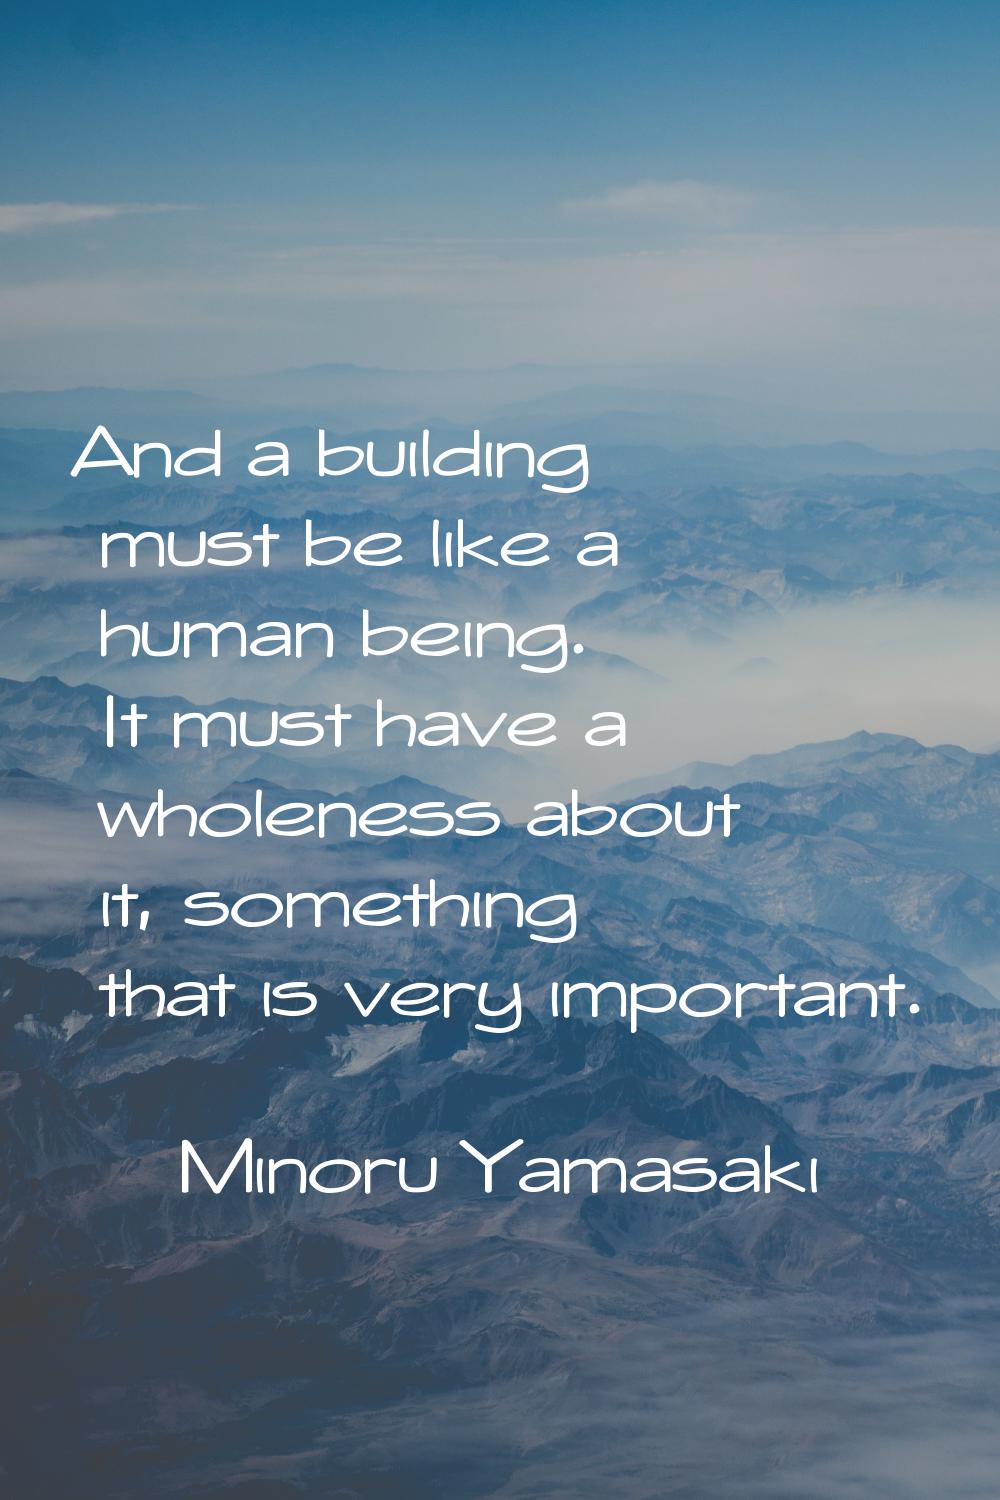 And a building must be like a human being. It must have a wholeness about it, something that is ver